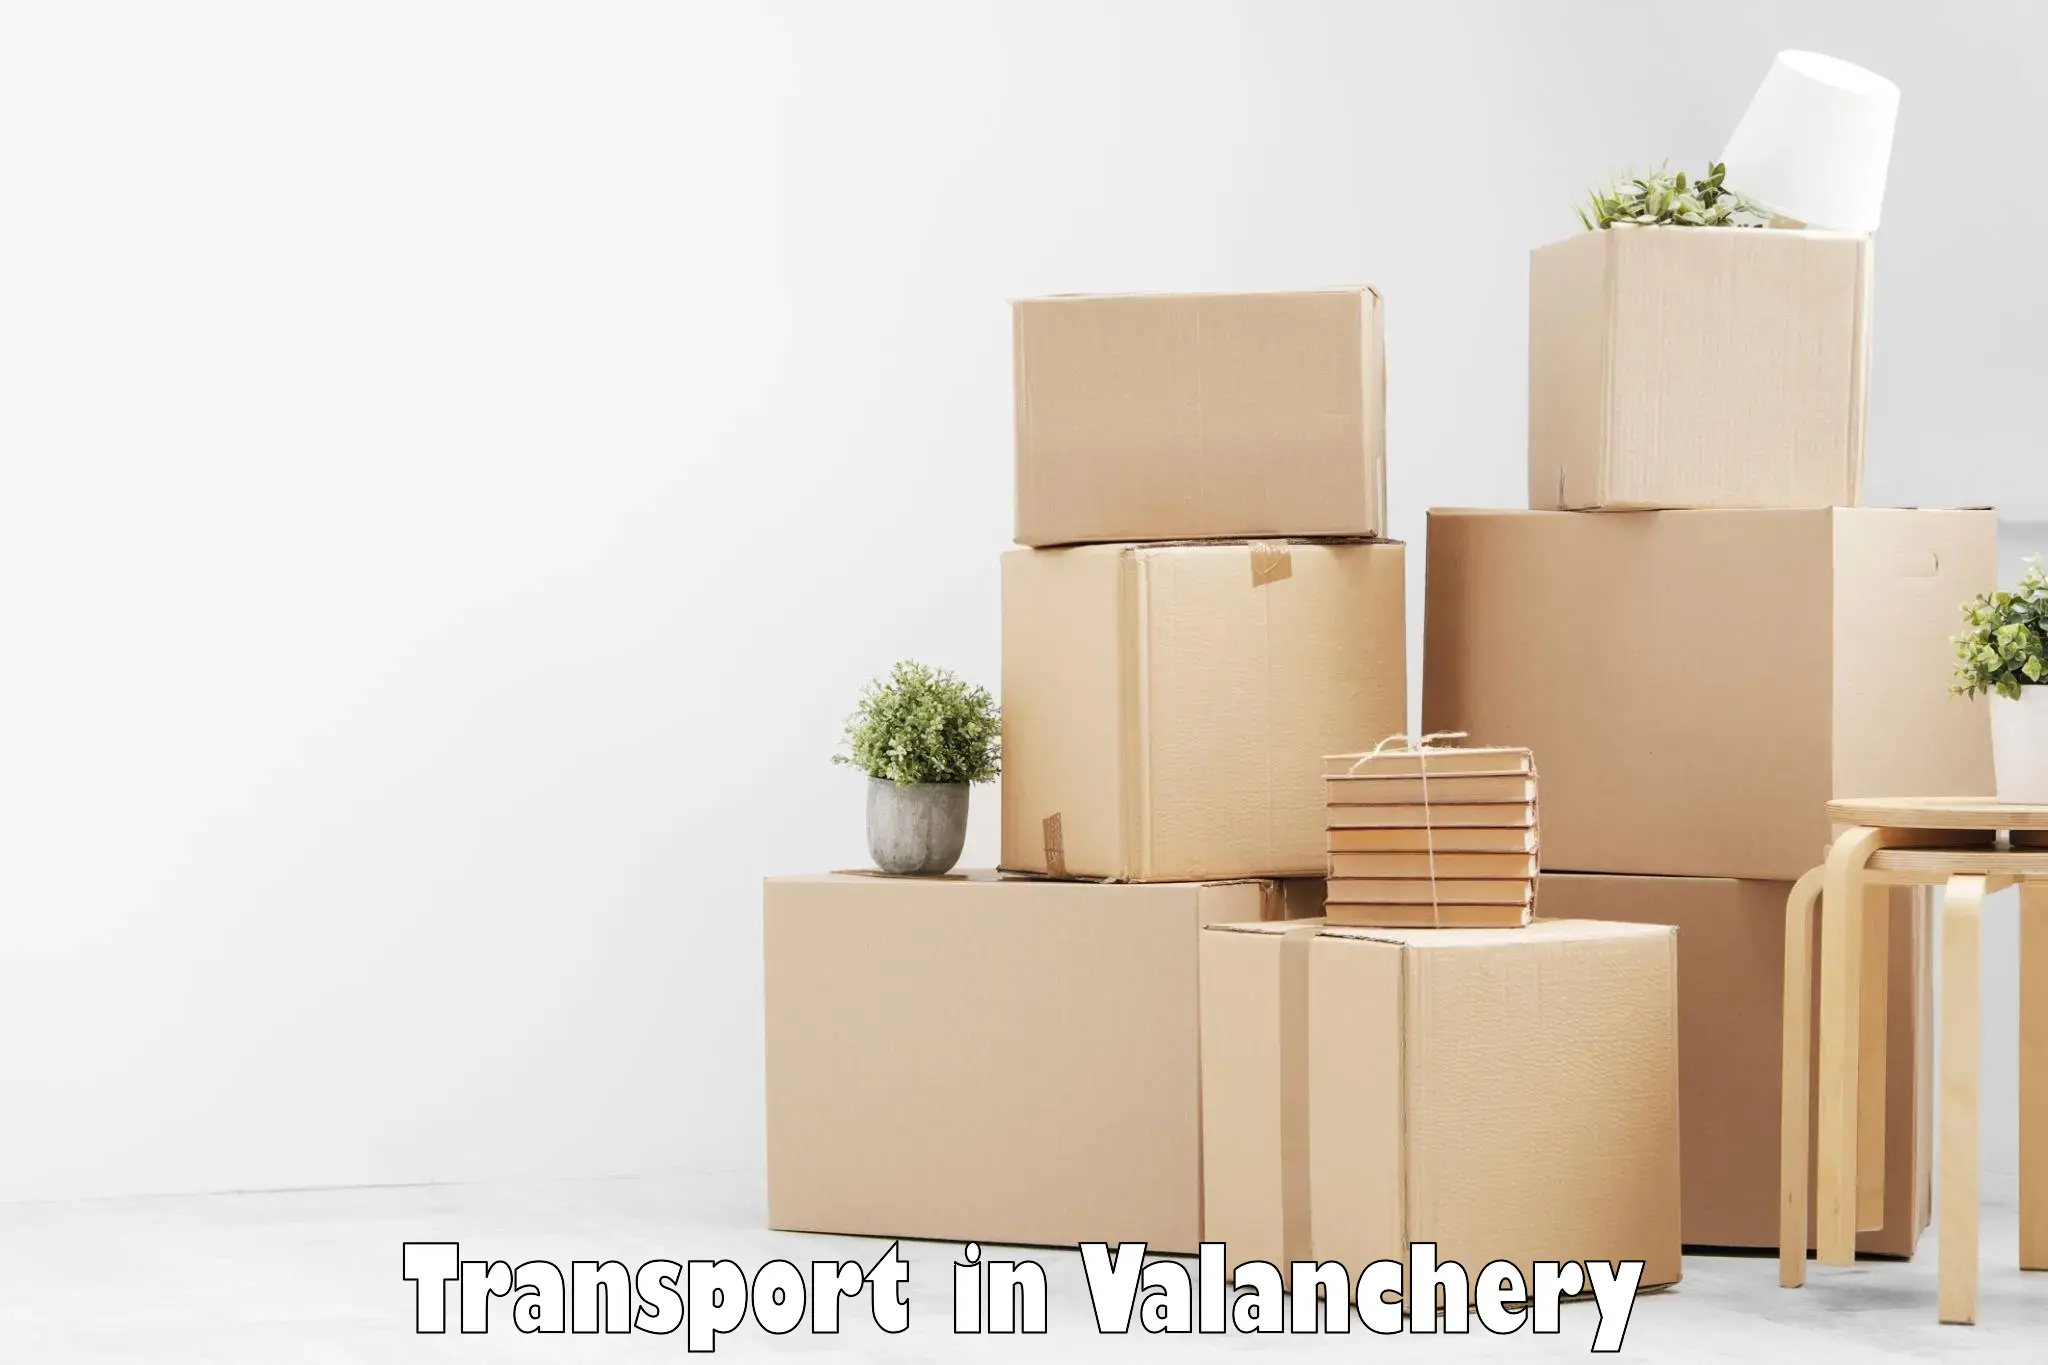 Furniture transport service in Valanchery